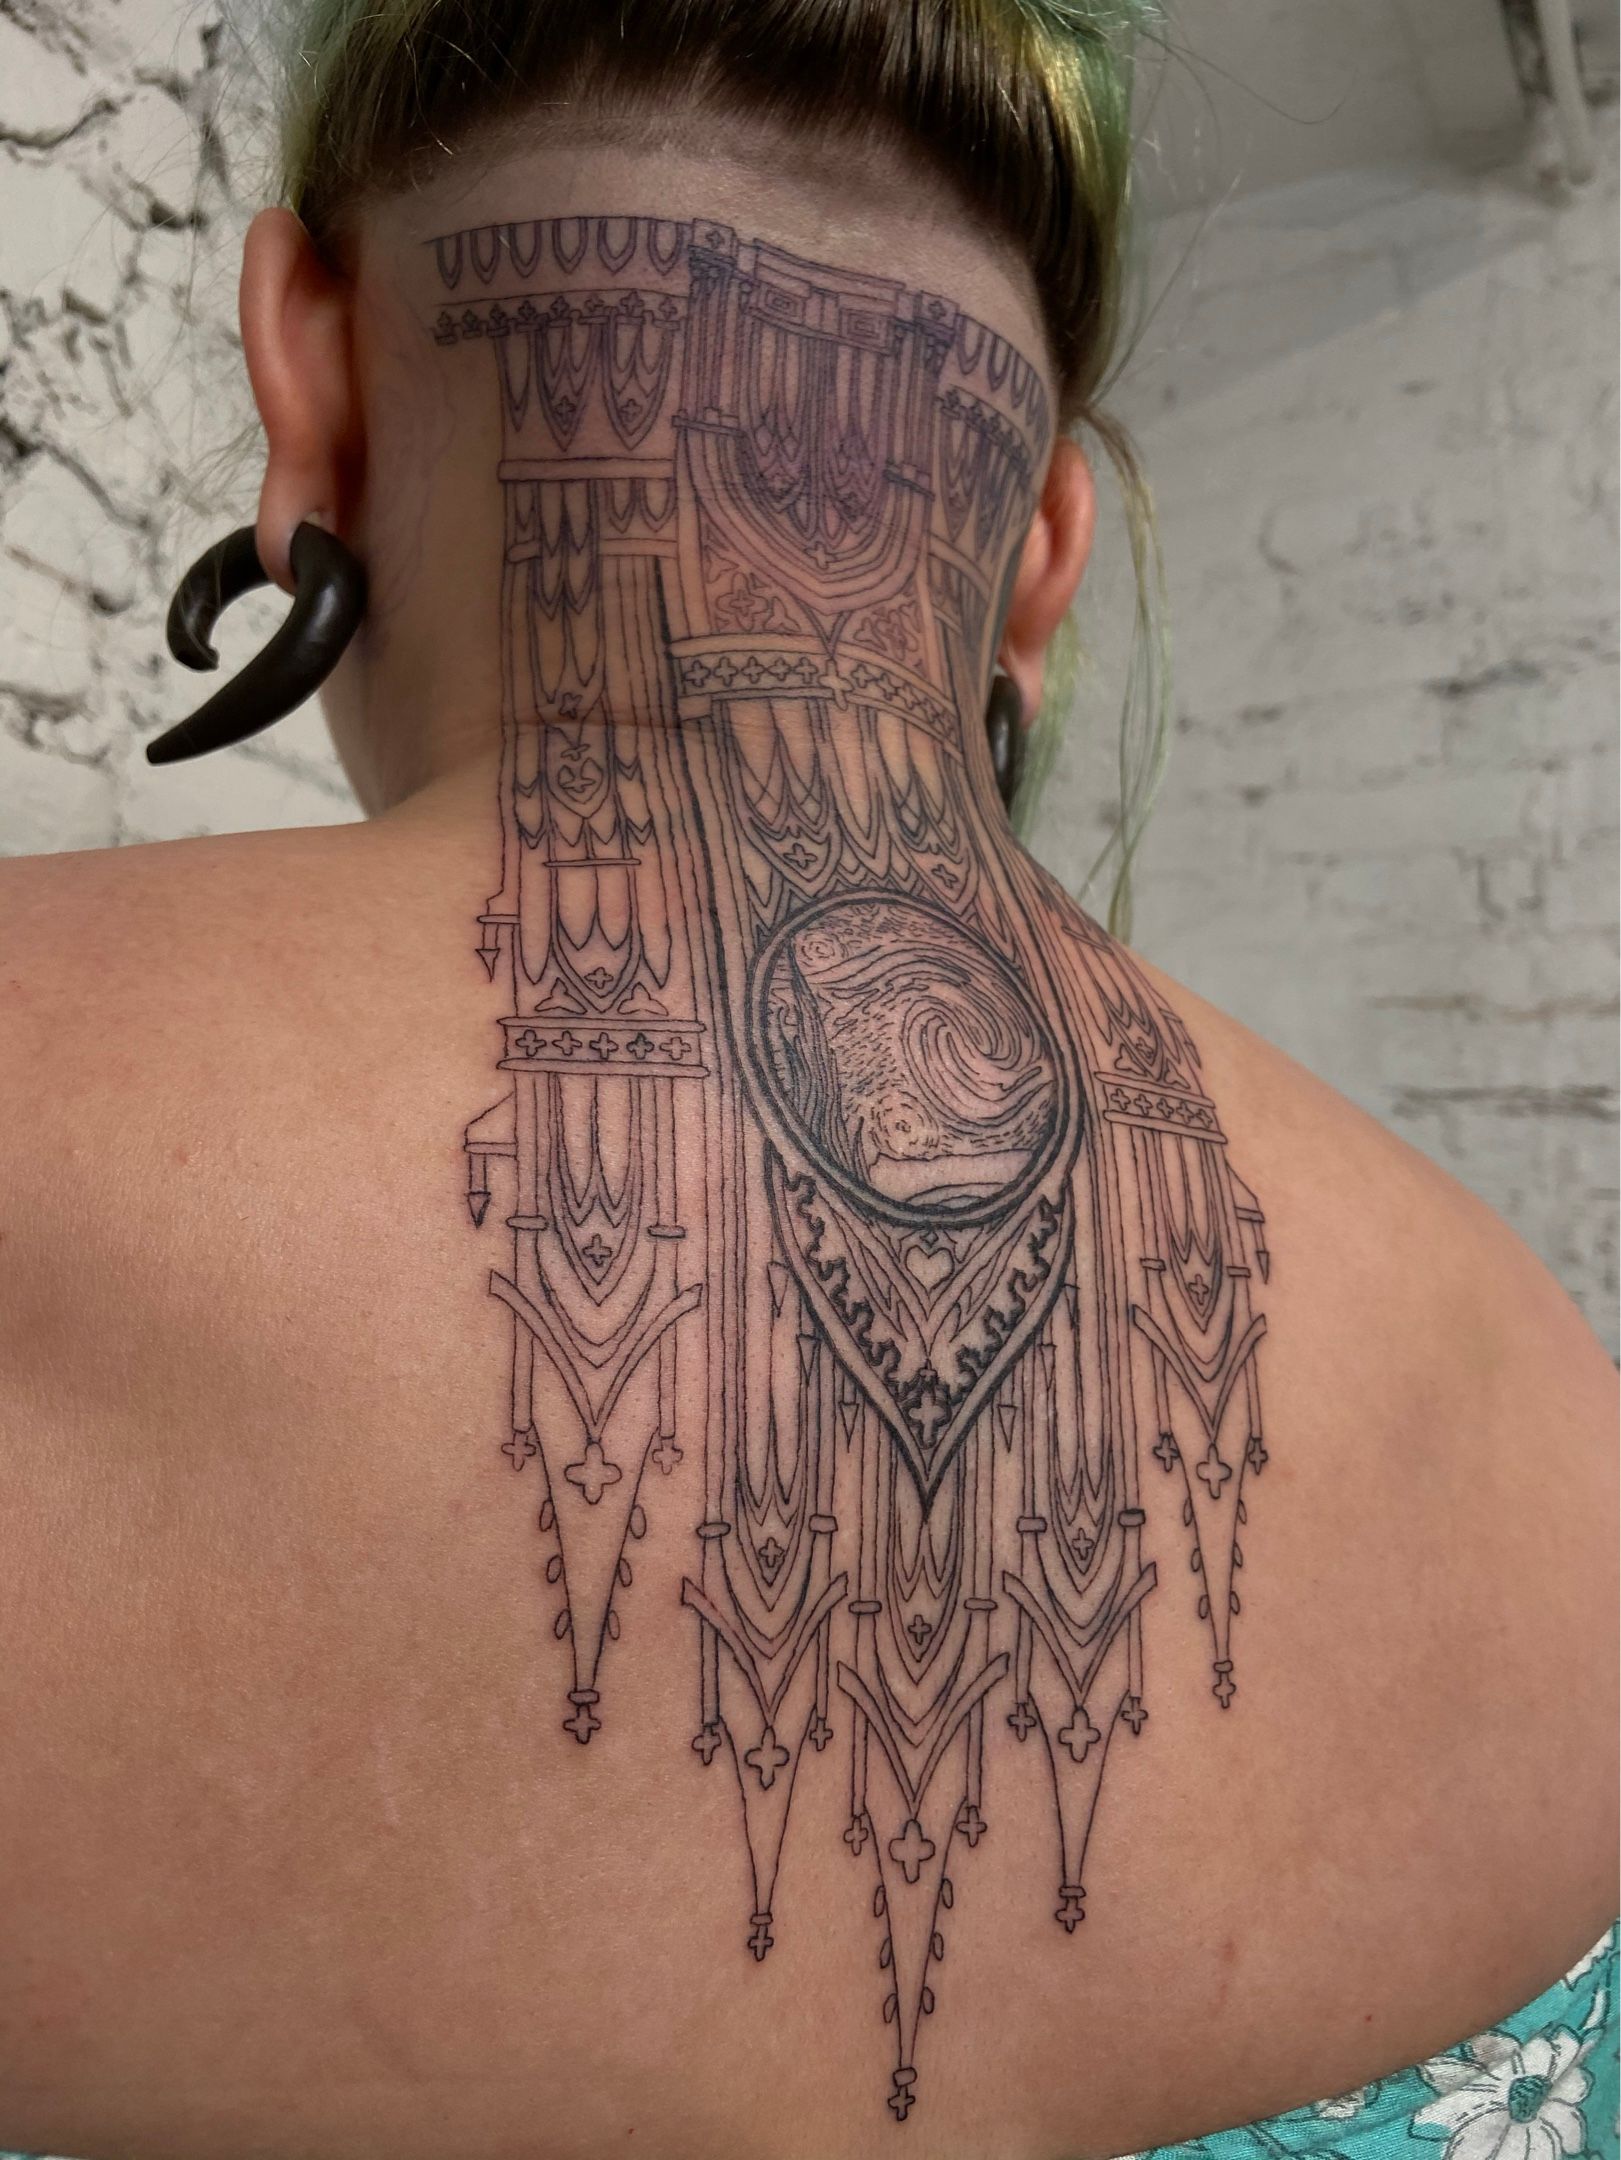 One of the most difficult pieces I've ever done, customized gothic  cathedral windows to complete the throat 🙏🏽 shout out to @jigs... |  Instagram